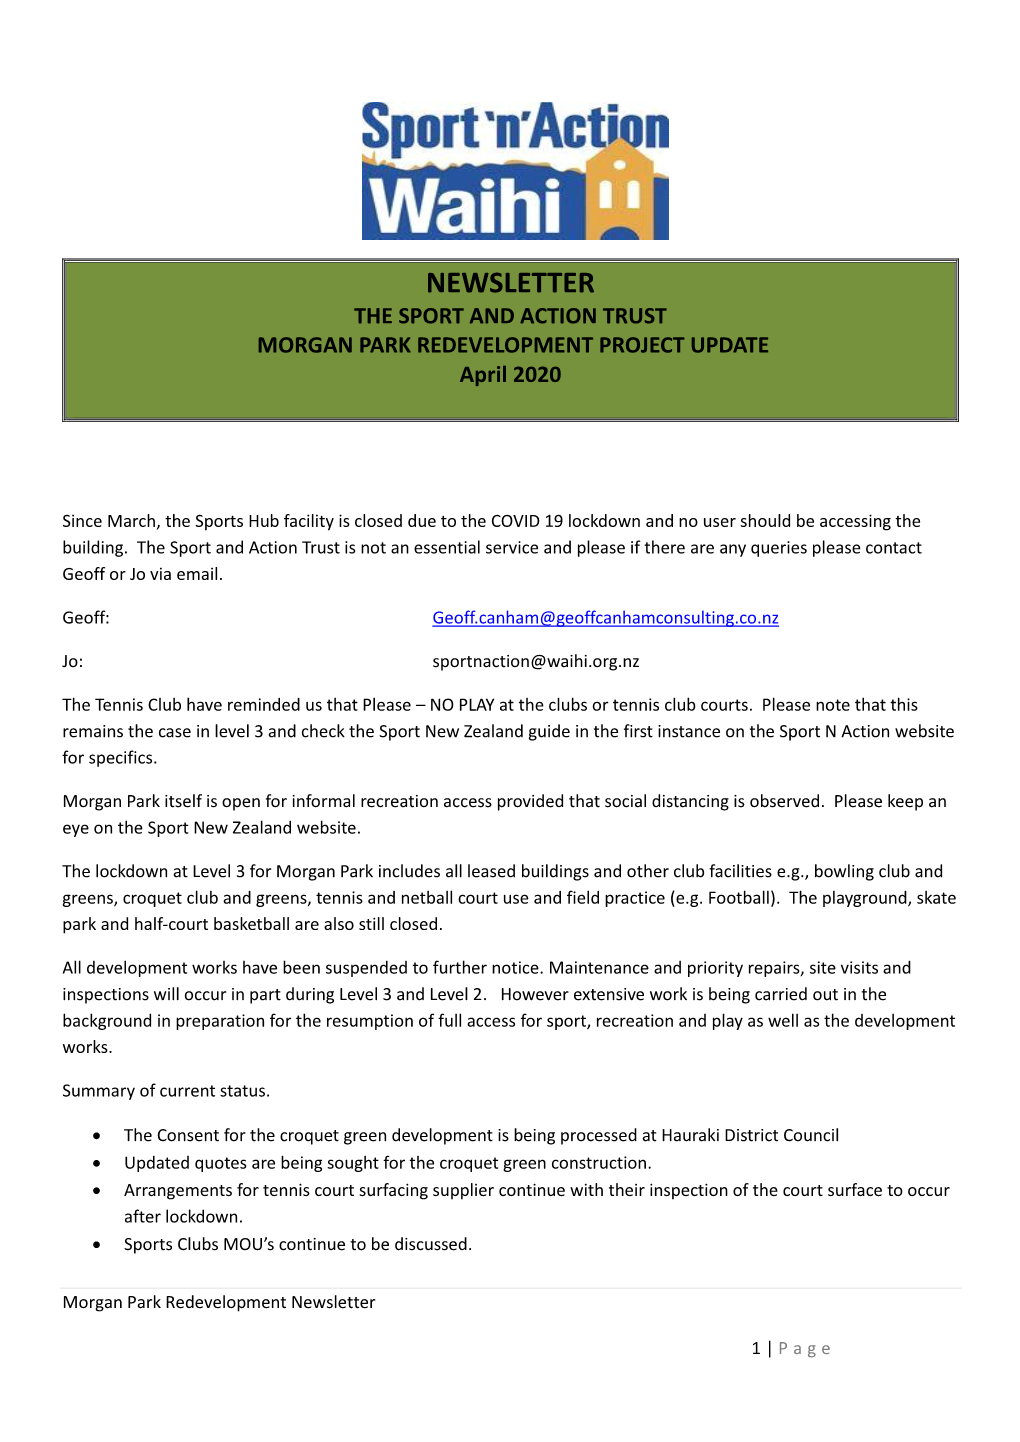 NEWSLETTER the SPORT and ACTION TRUST MORGAN PARK REDEVELOPMENT PROJECT UPDATE April 2020